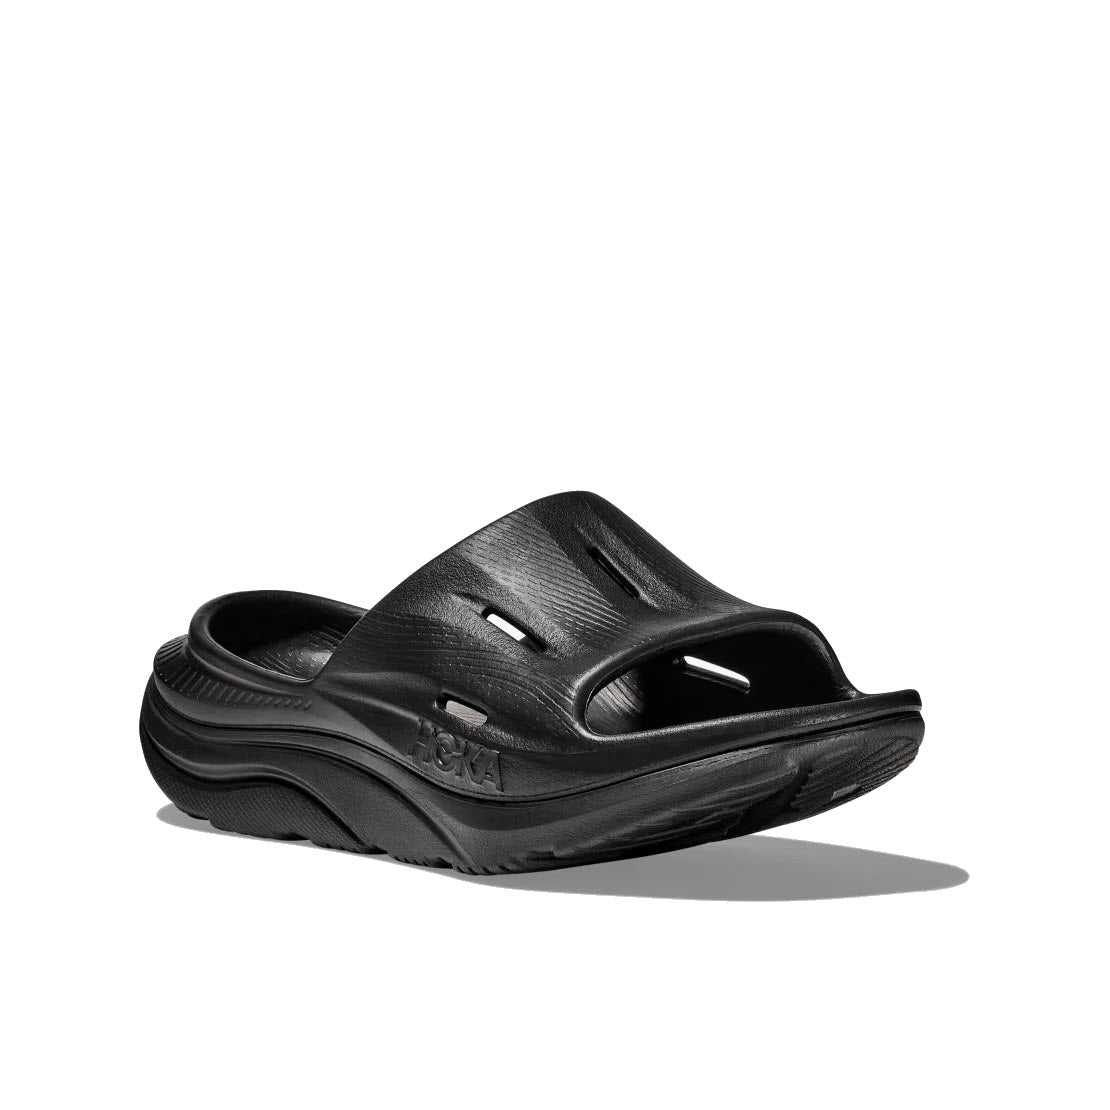 A pair of black textured HOKA ORA RECOVERY SLIDE 3 sandals with a sugarcane footbed against a white background.